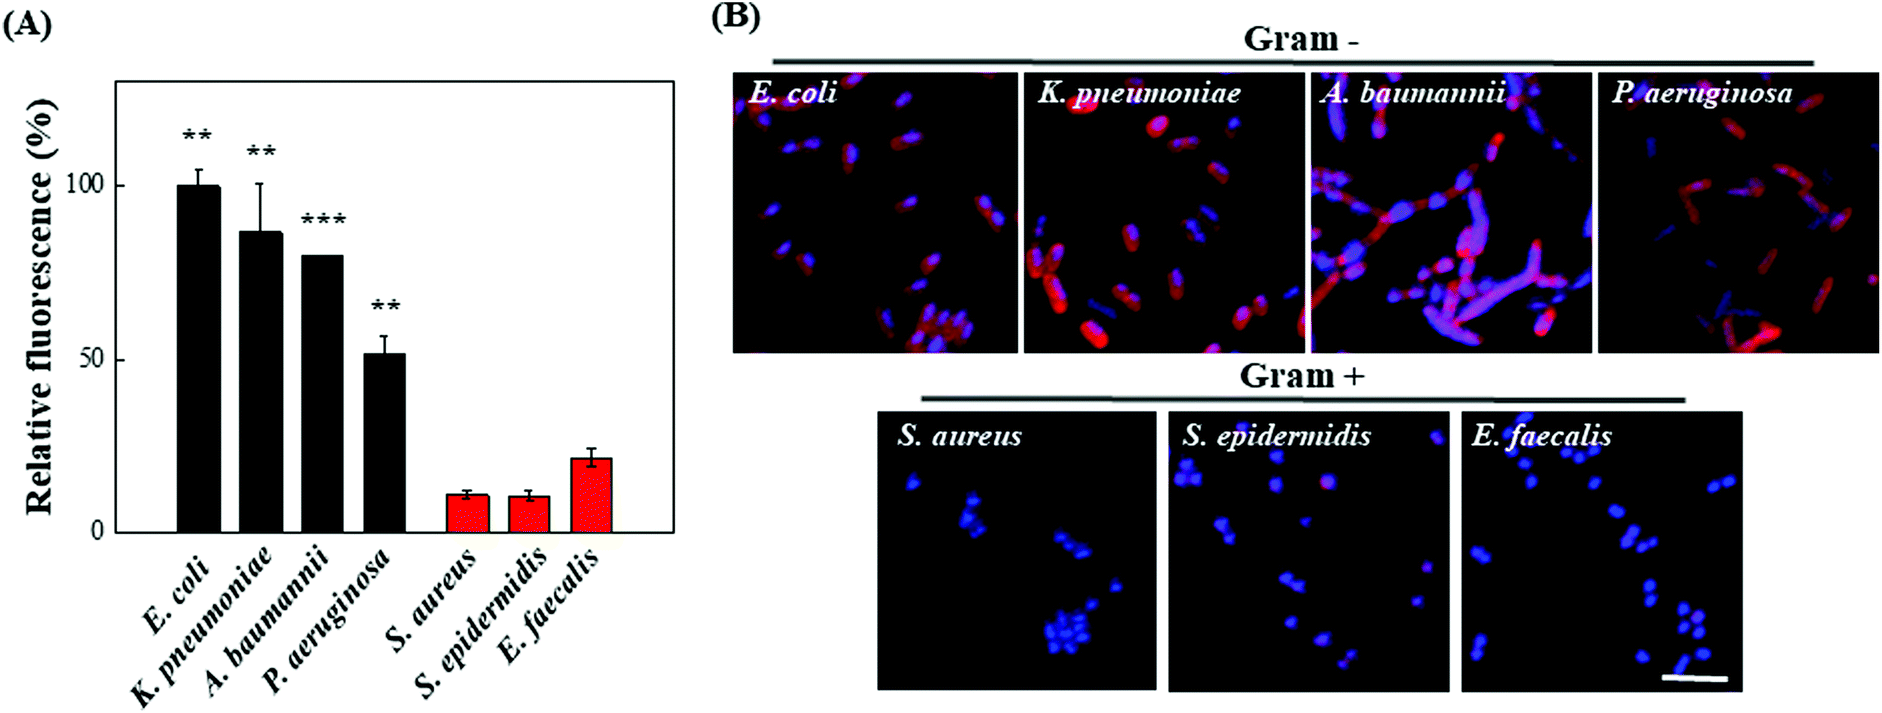 Ultra Fast And Universal Detection Of Gram Negative Bacteria In Complex Samples Based On Colistin Derivatives Biomaterials Science Rsc Publishing